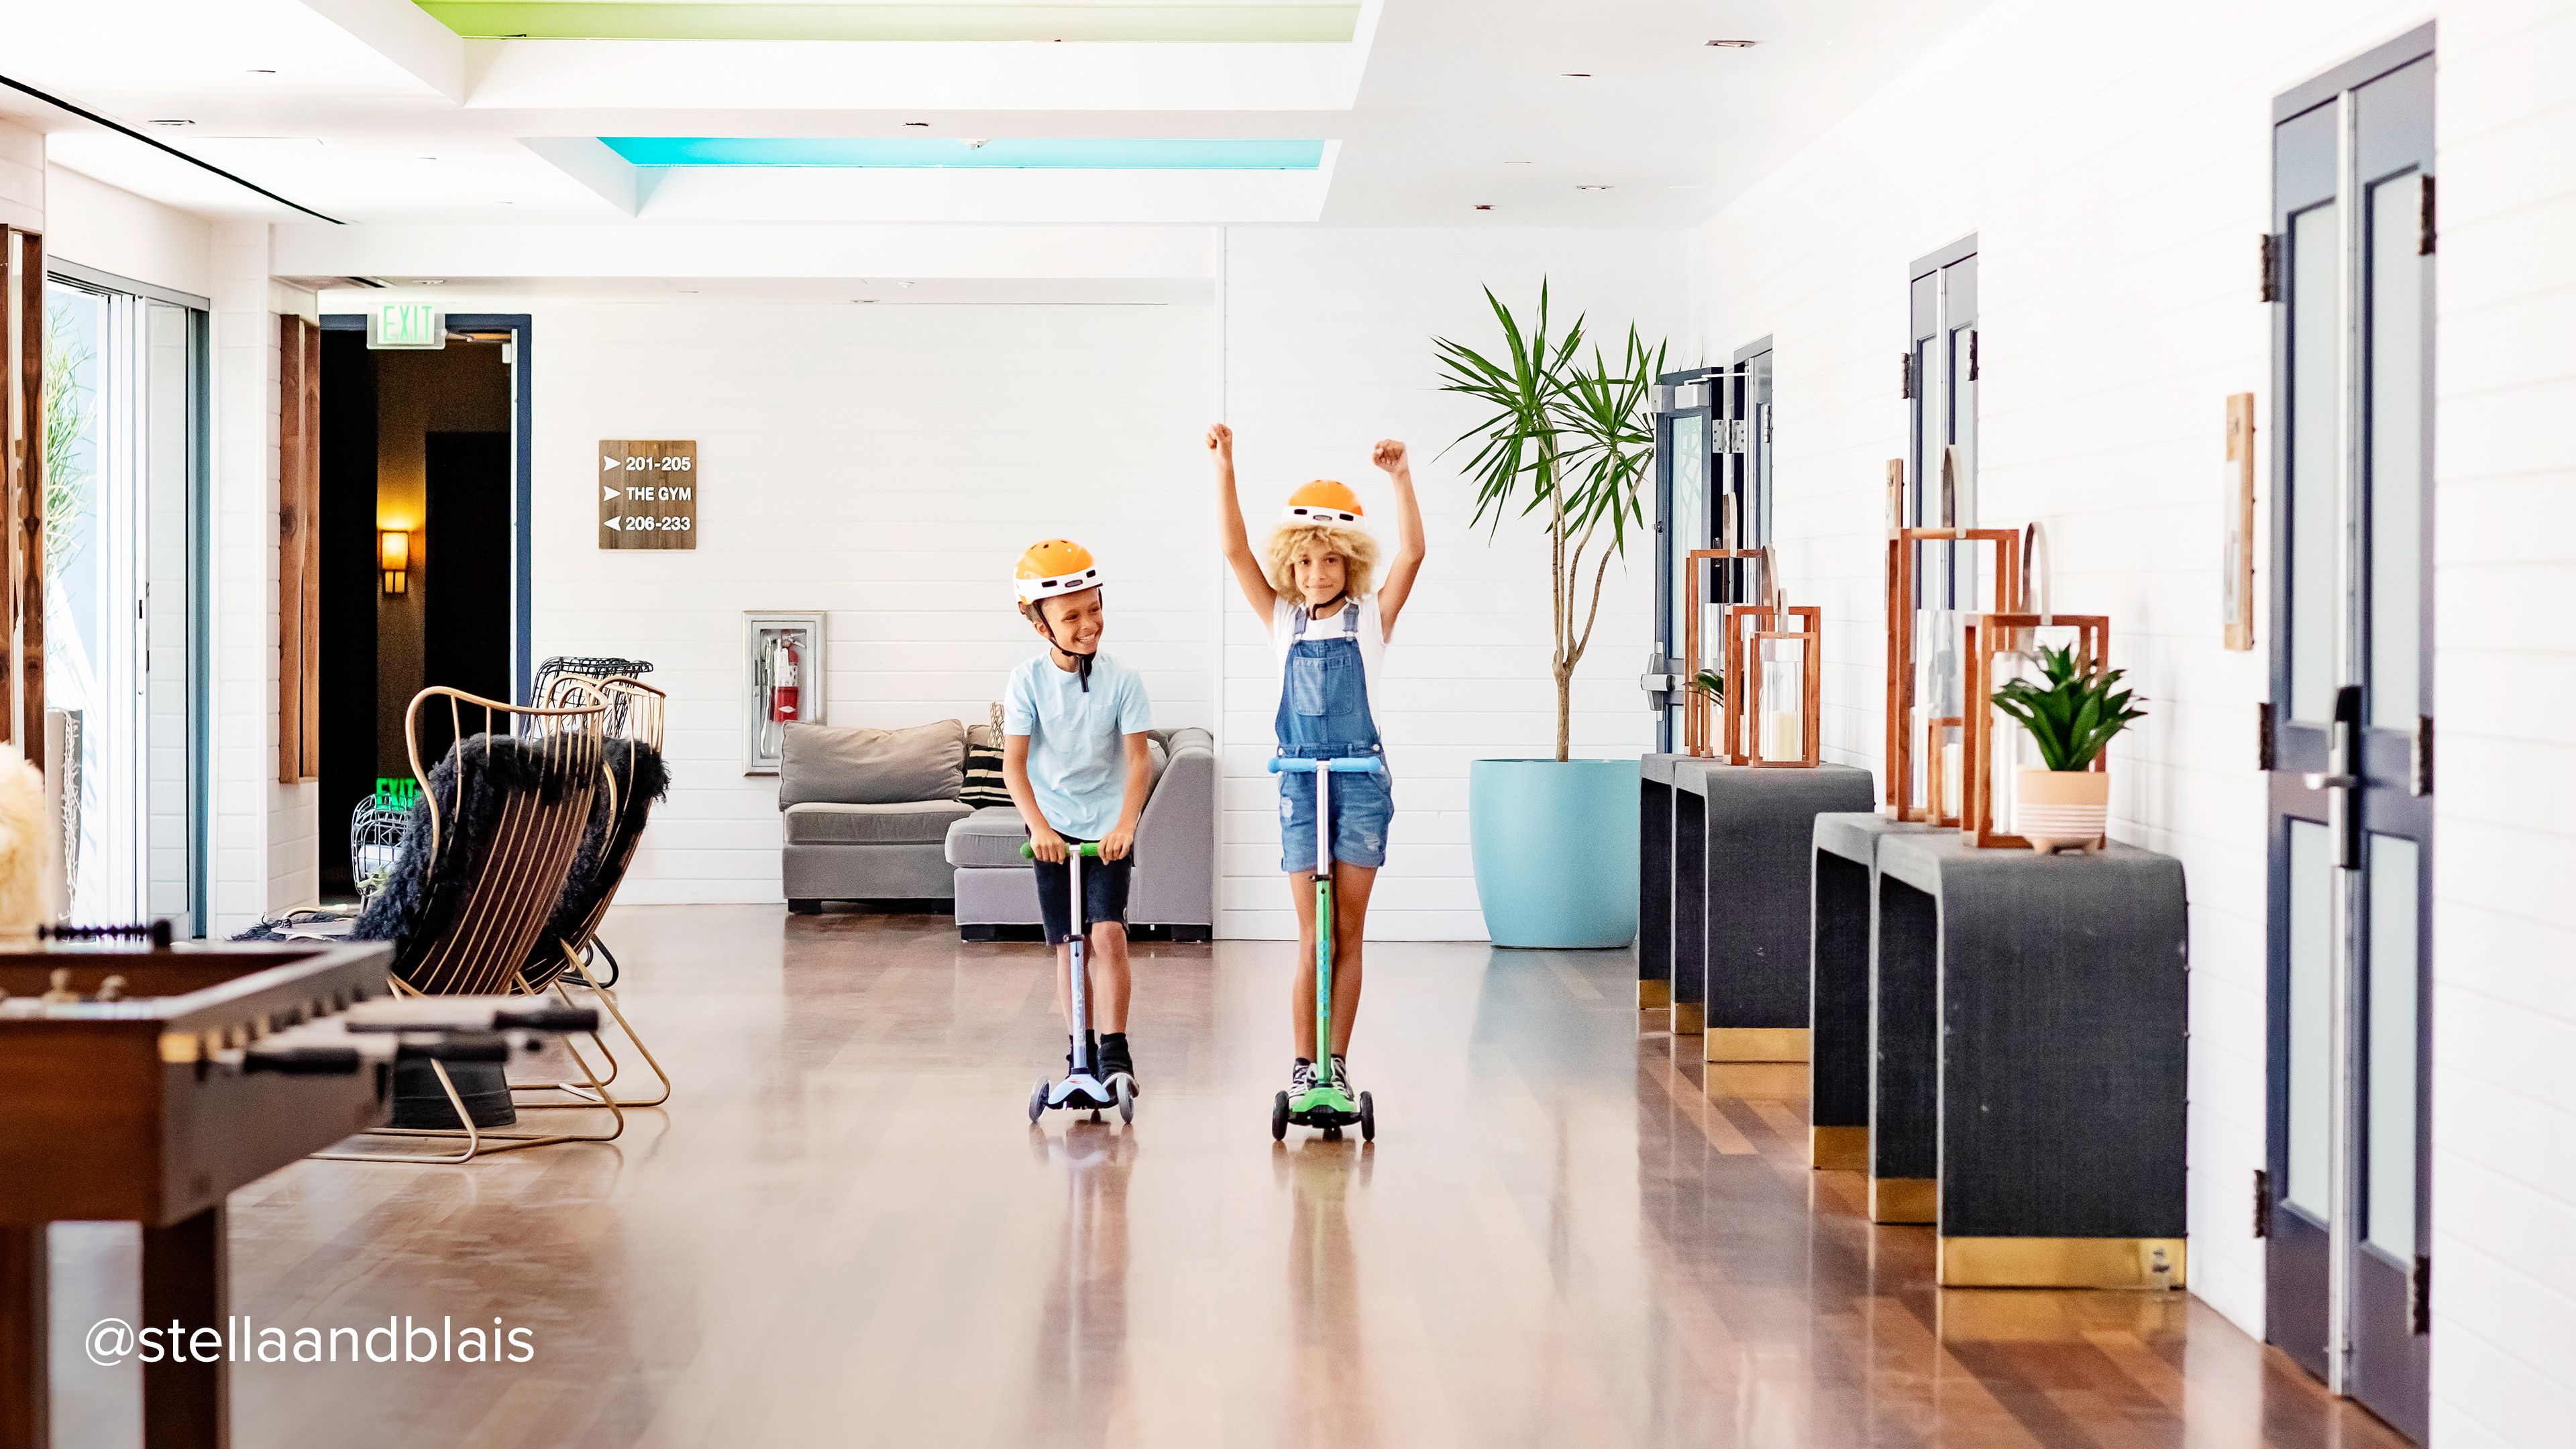 two kids with helmets riding micro scooteres inside a hotel lobby